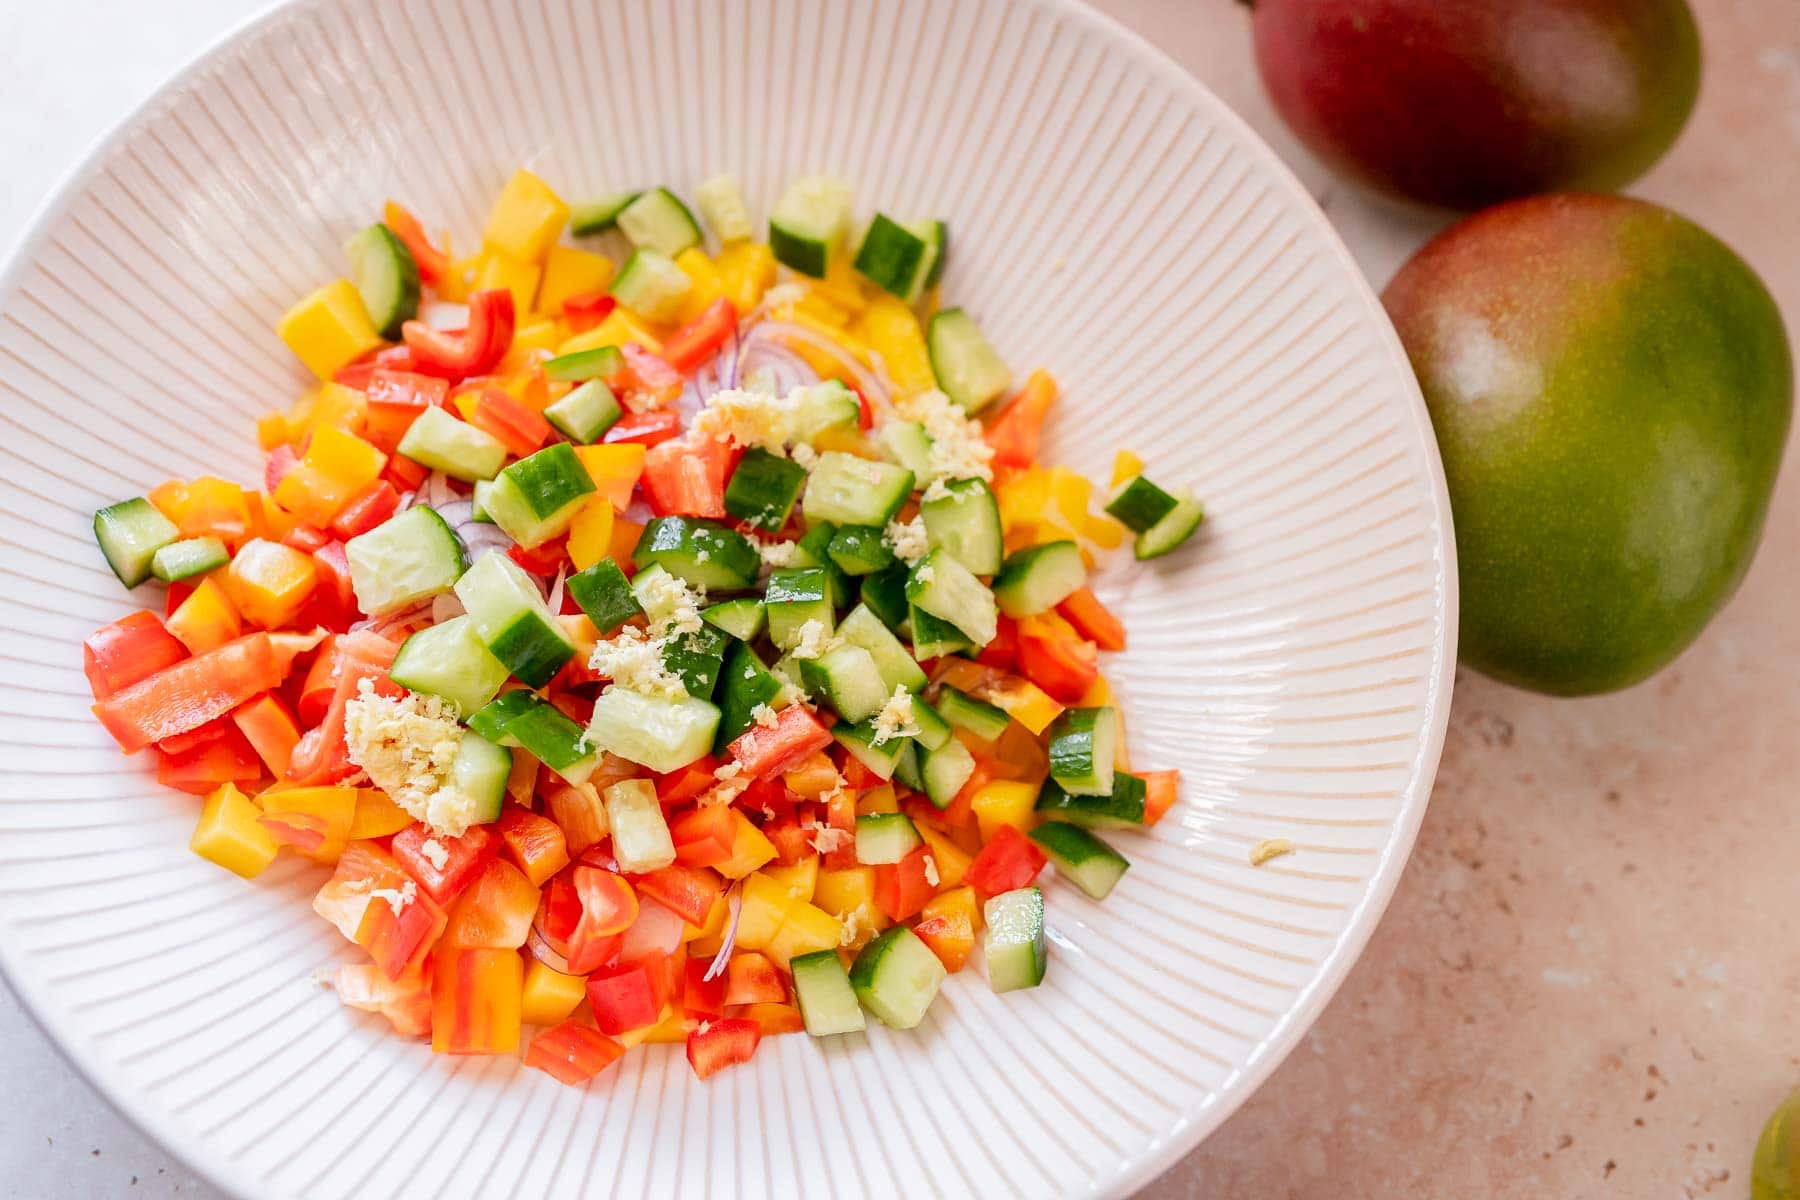 A large bowl filled with chopped fruit and vegetables.